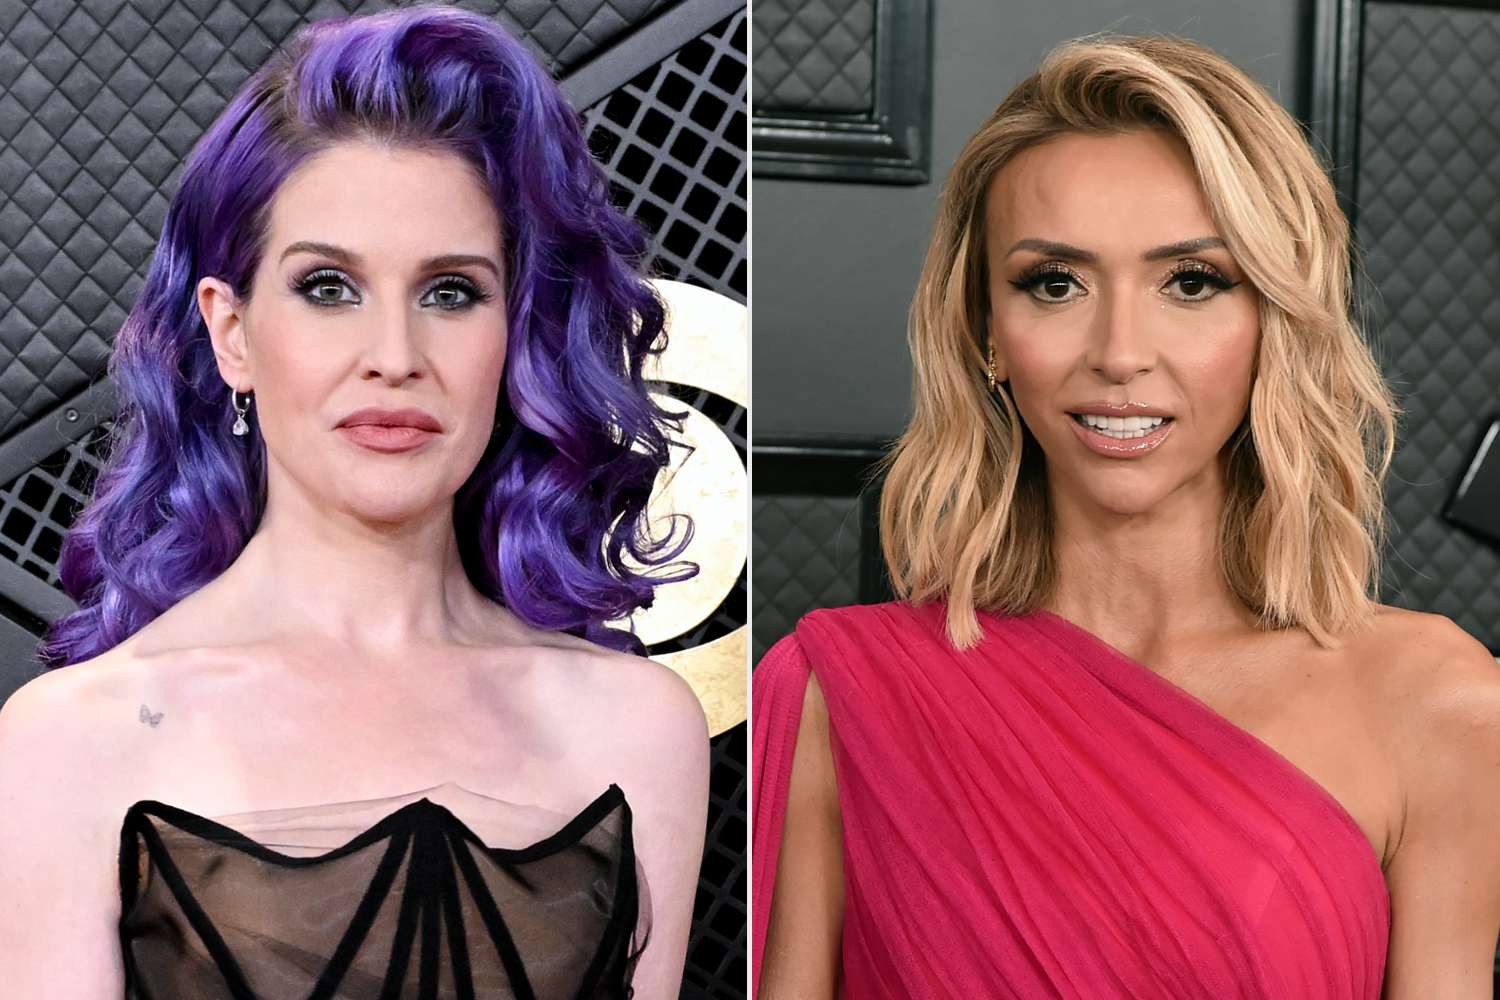 Kelly Osbourne Shares 'Biggest Regret' from Fashion Police Exit as She Slams Former Co-Host Giuliana Rancic